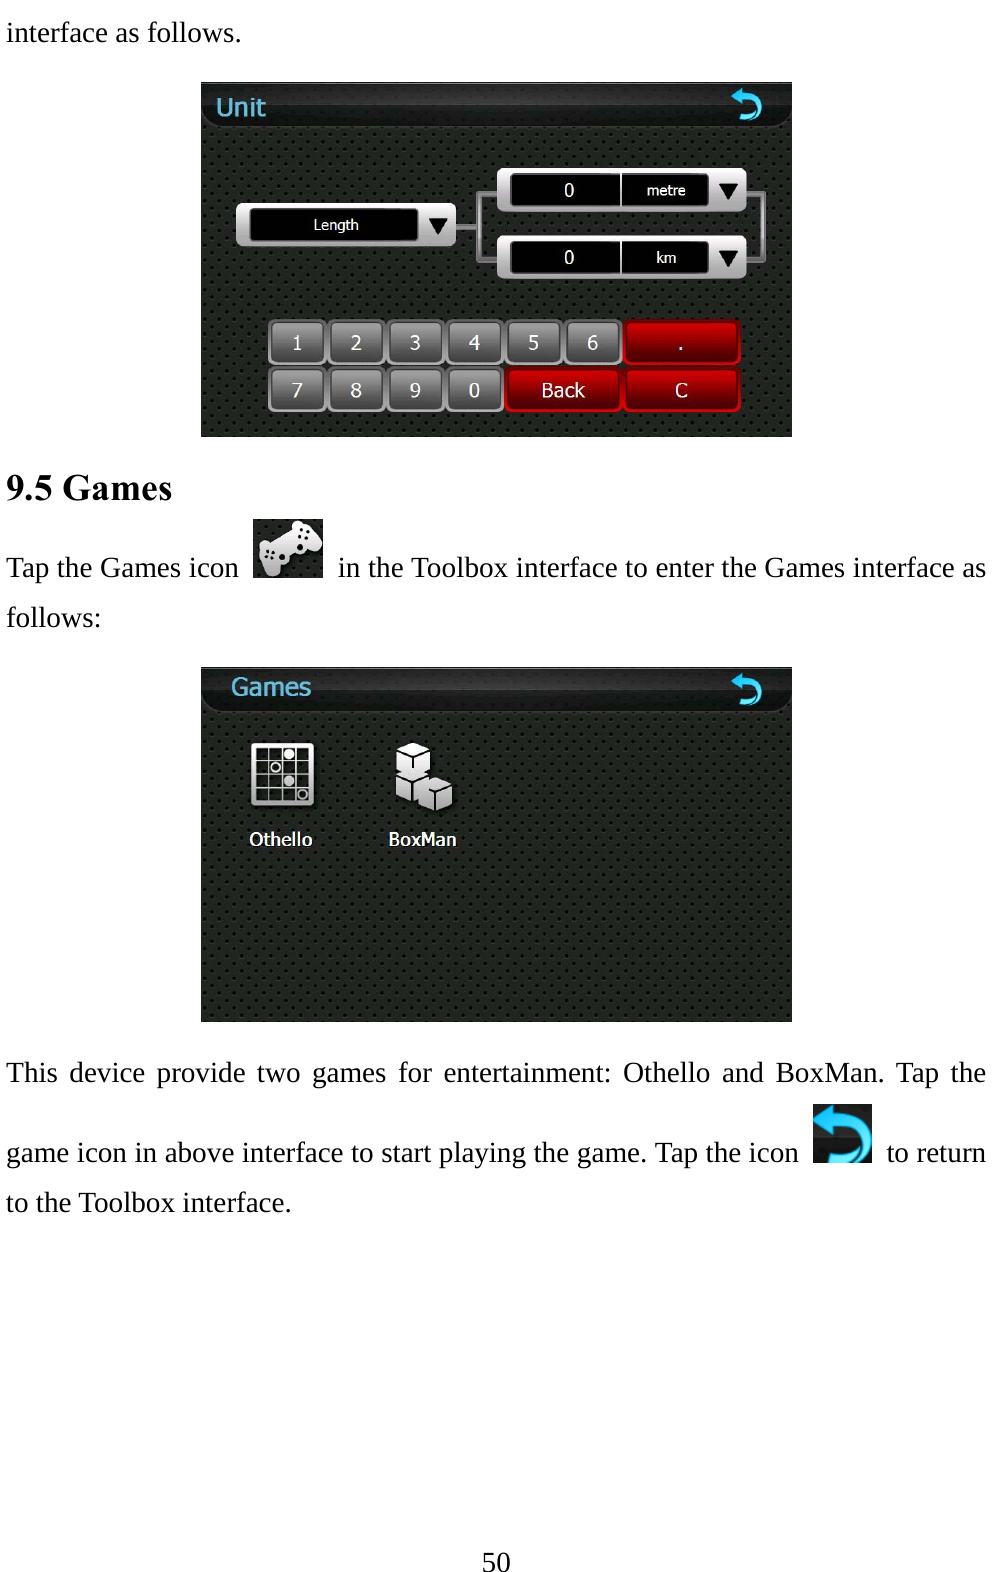  50 interface as follows.  9.5 Games   Tap the Games icon    in the Toolbox interface to enter the Games interface as follows:  This device provide two games for entertainment: Othello and BoxMan. Tap the game icon in above interface to start playing the game. Tap the icon   to return to the Toolbox interface. 